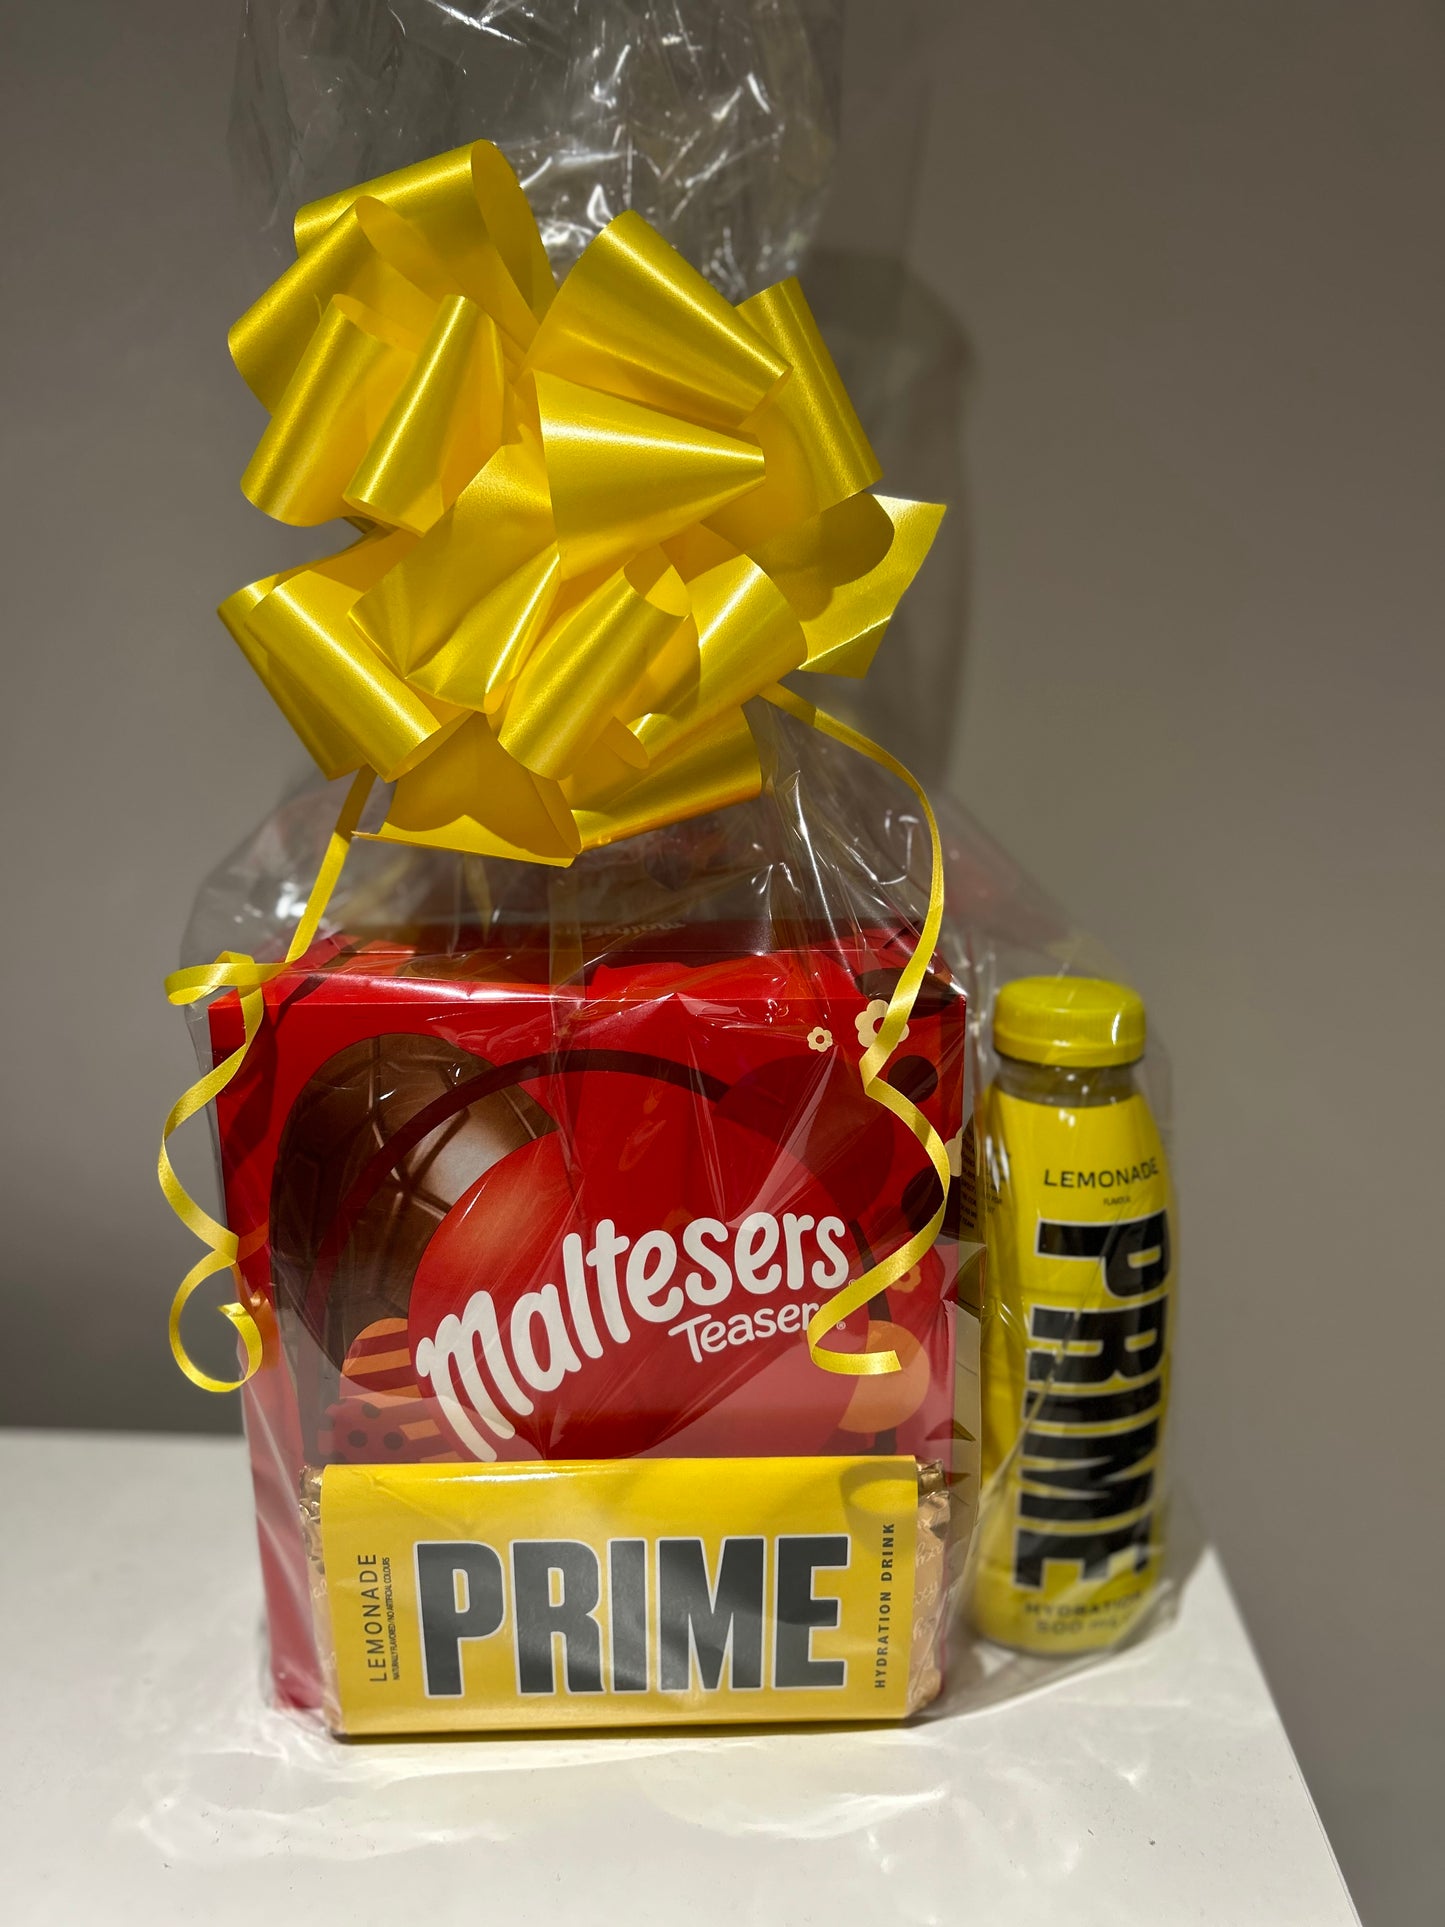 Prime hamper prime easter egg personalised with name